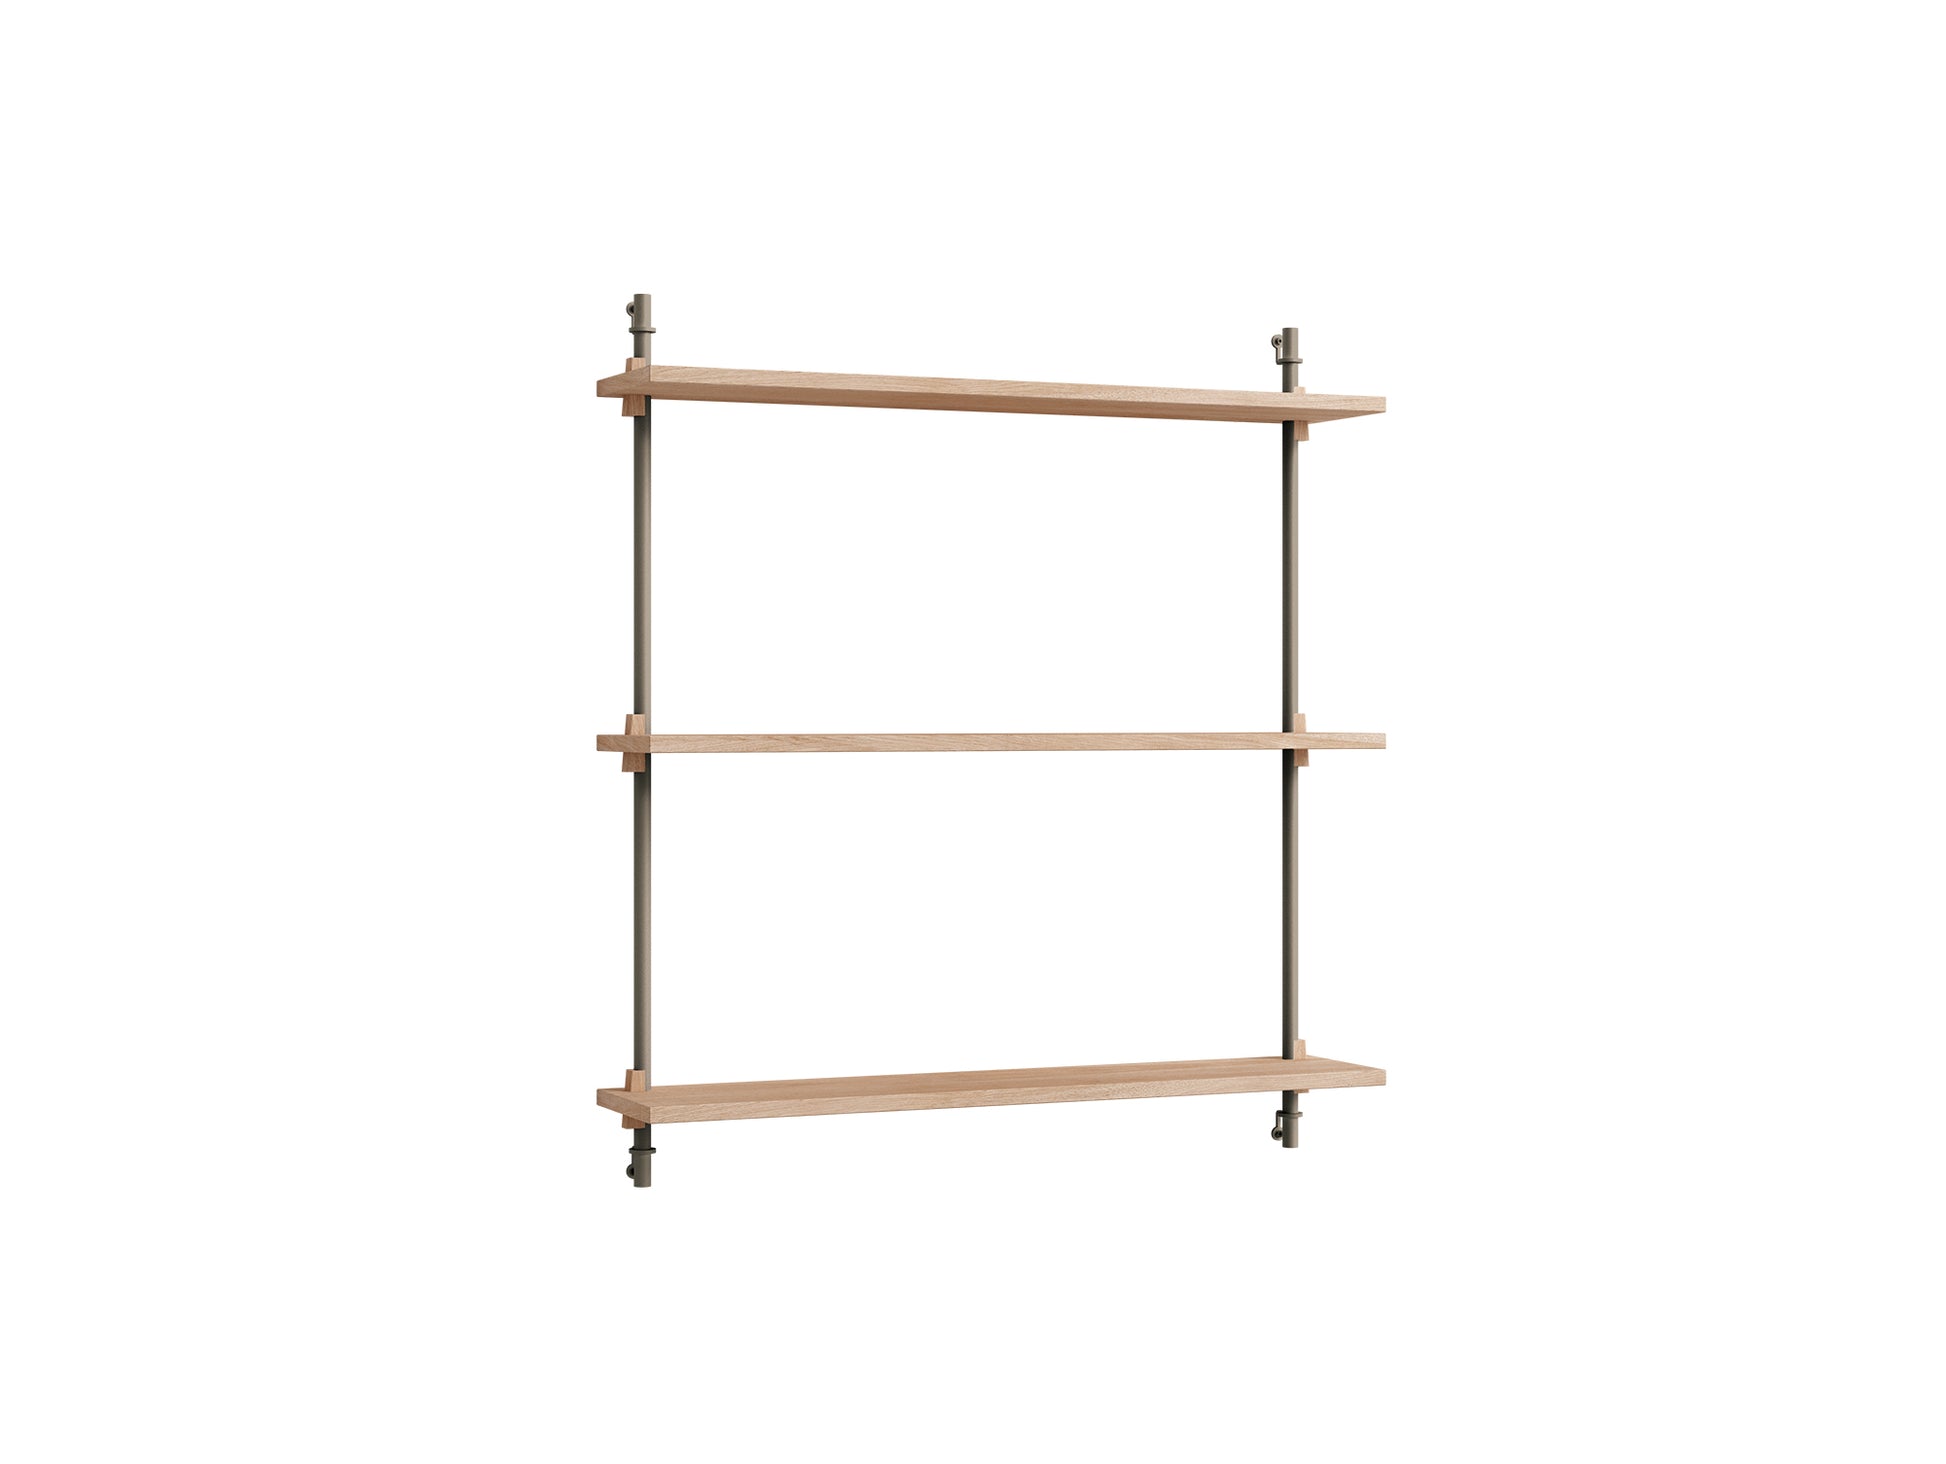 Wall Shelving System Sets (85 cm) by Moebe - WS.85.1 /  Warm Grey Uprights / Oiled Oak